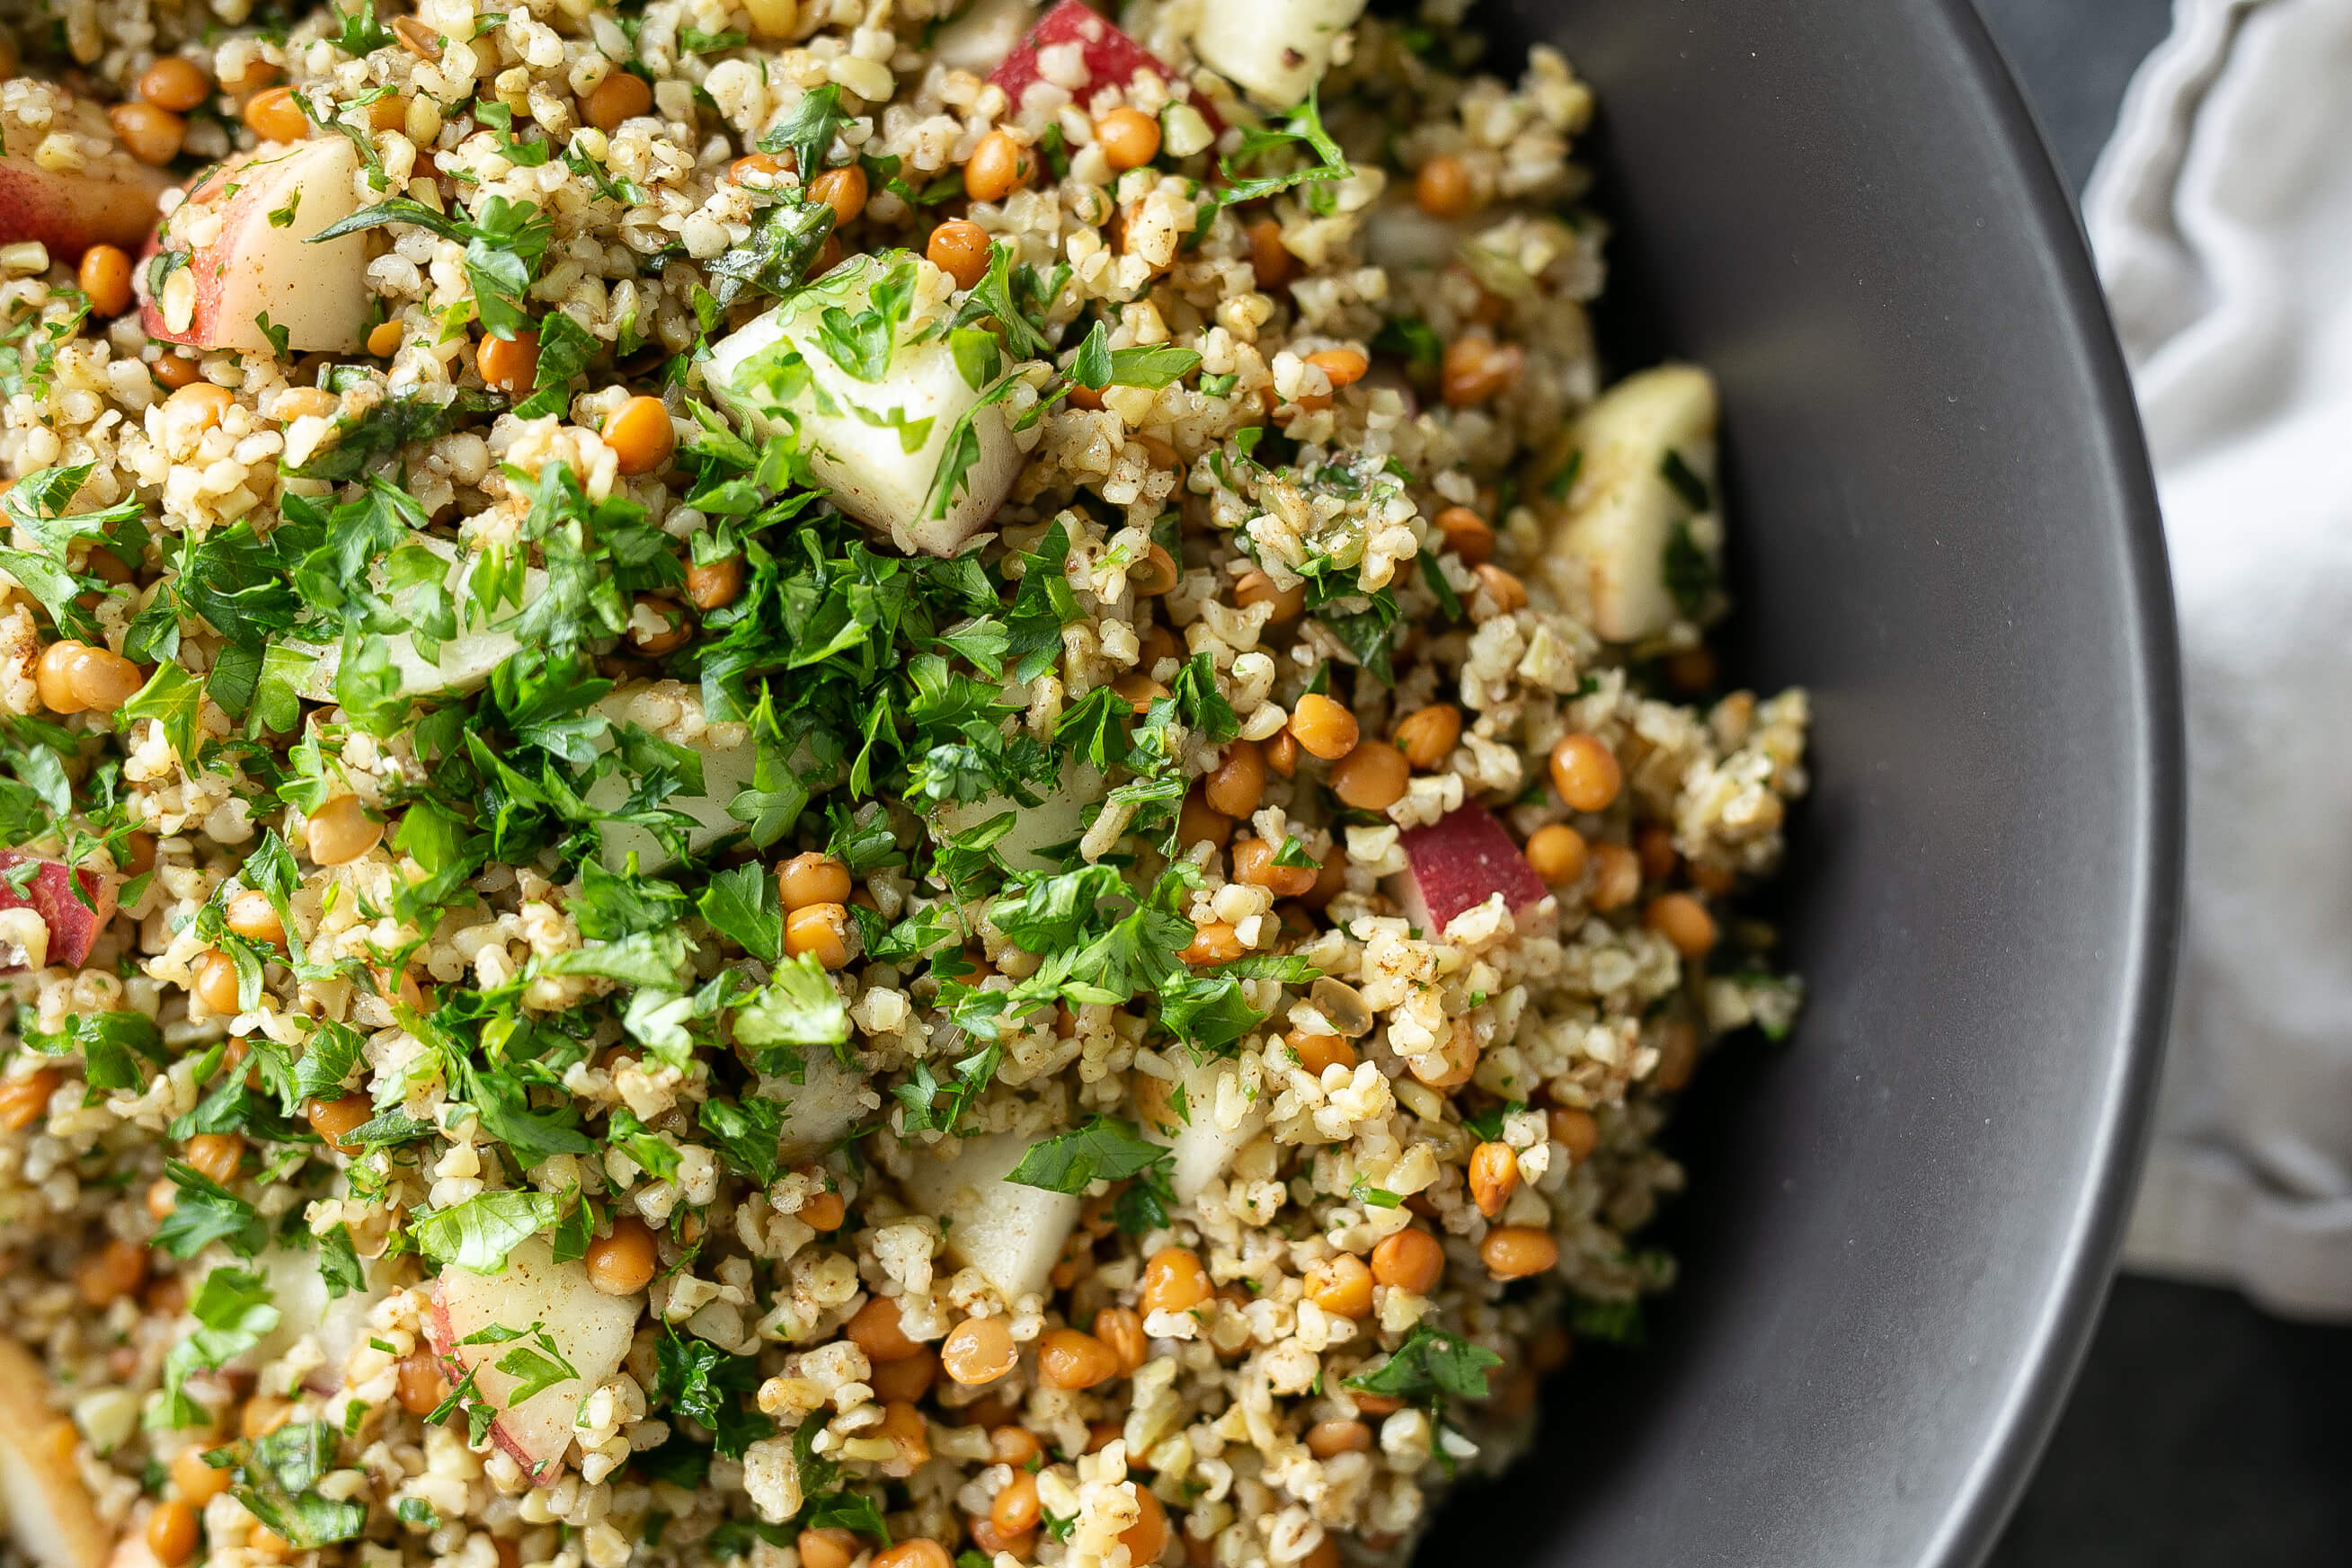 20 Low-Fat Oil-Free Meals Your Clients Will Love: Peach & Lentil Freekeh Salad